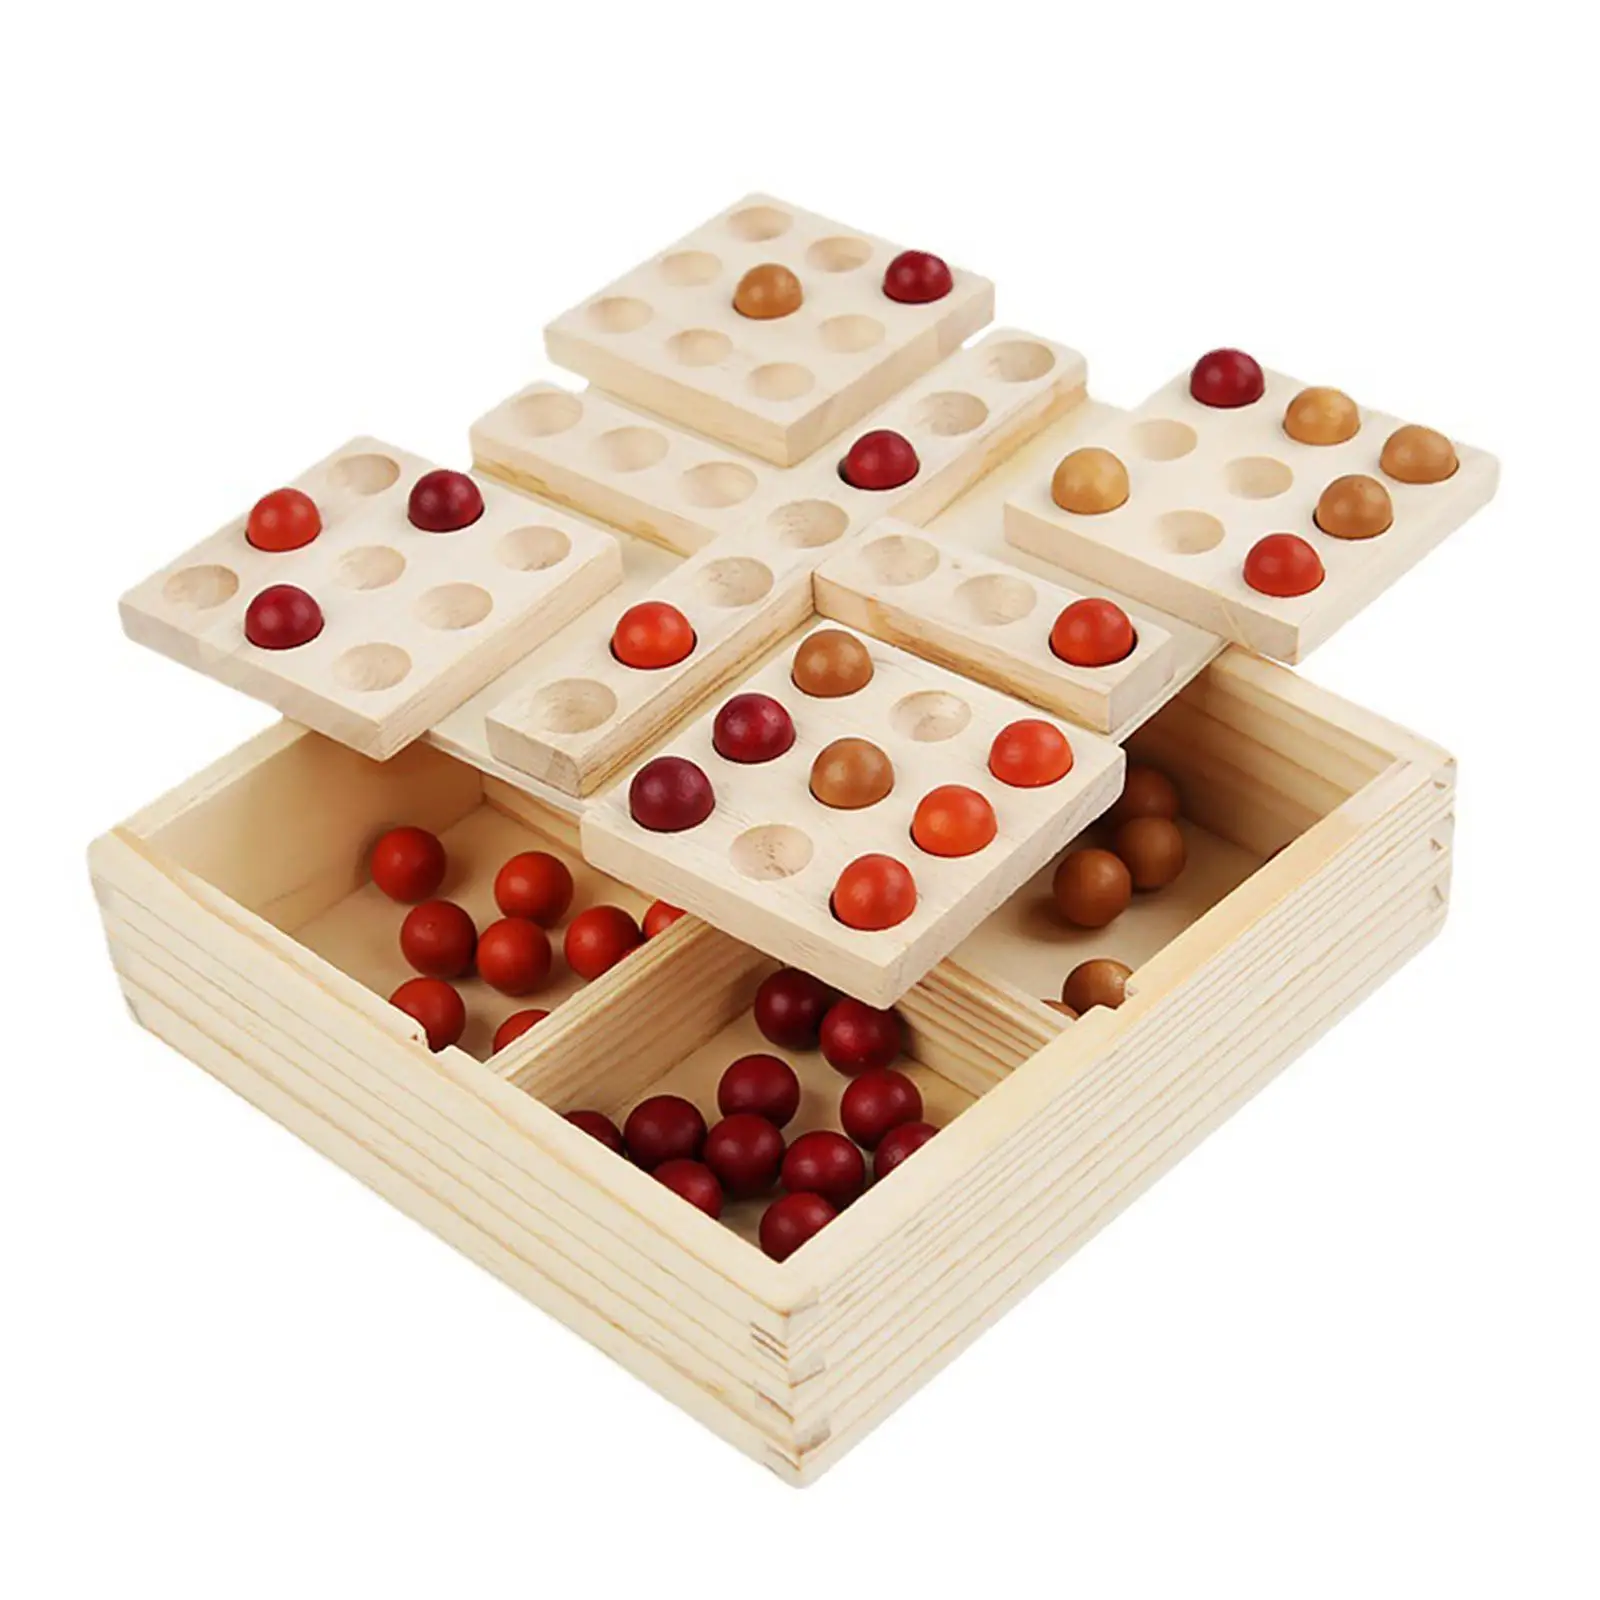 Wood Rotate Gobang Parenting Puzzle Board Game with Beads Travel Interactive Gobang Chess Puzzle Game for Game Gift Party Favors